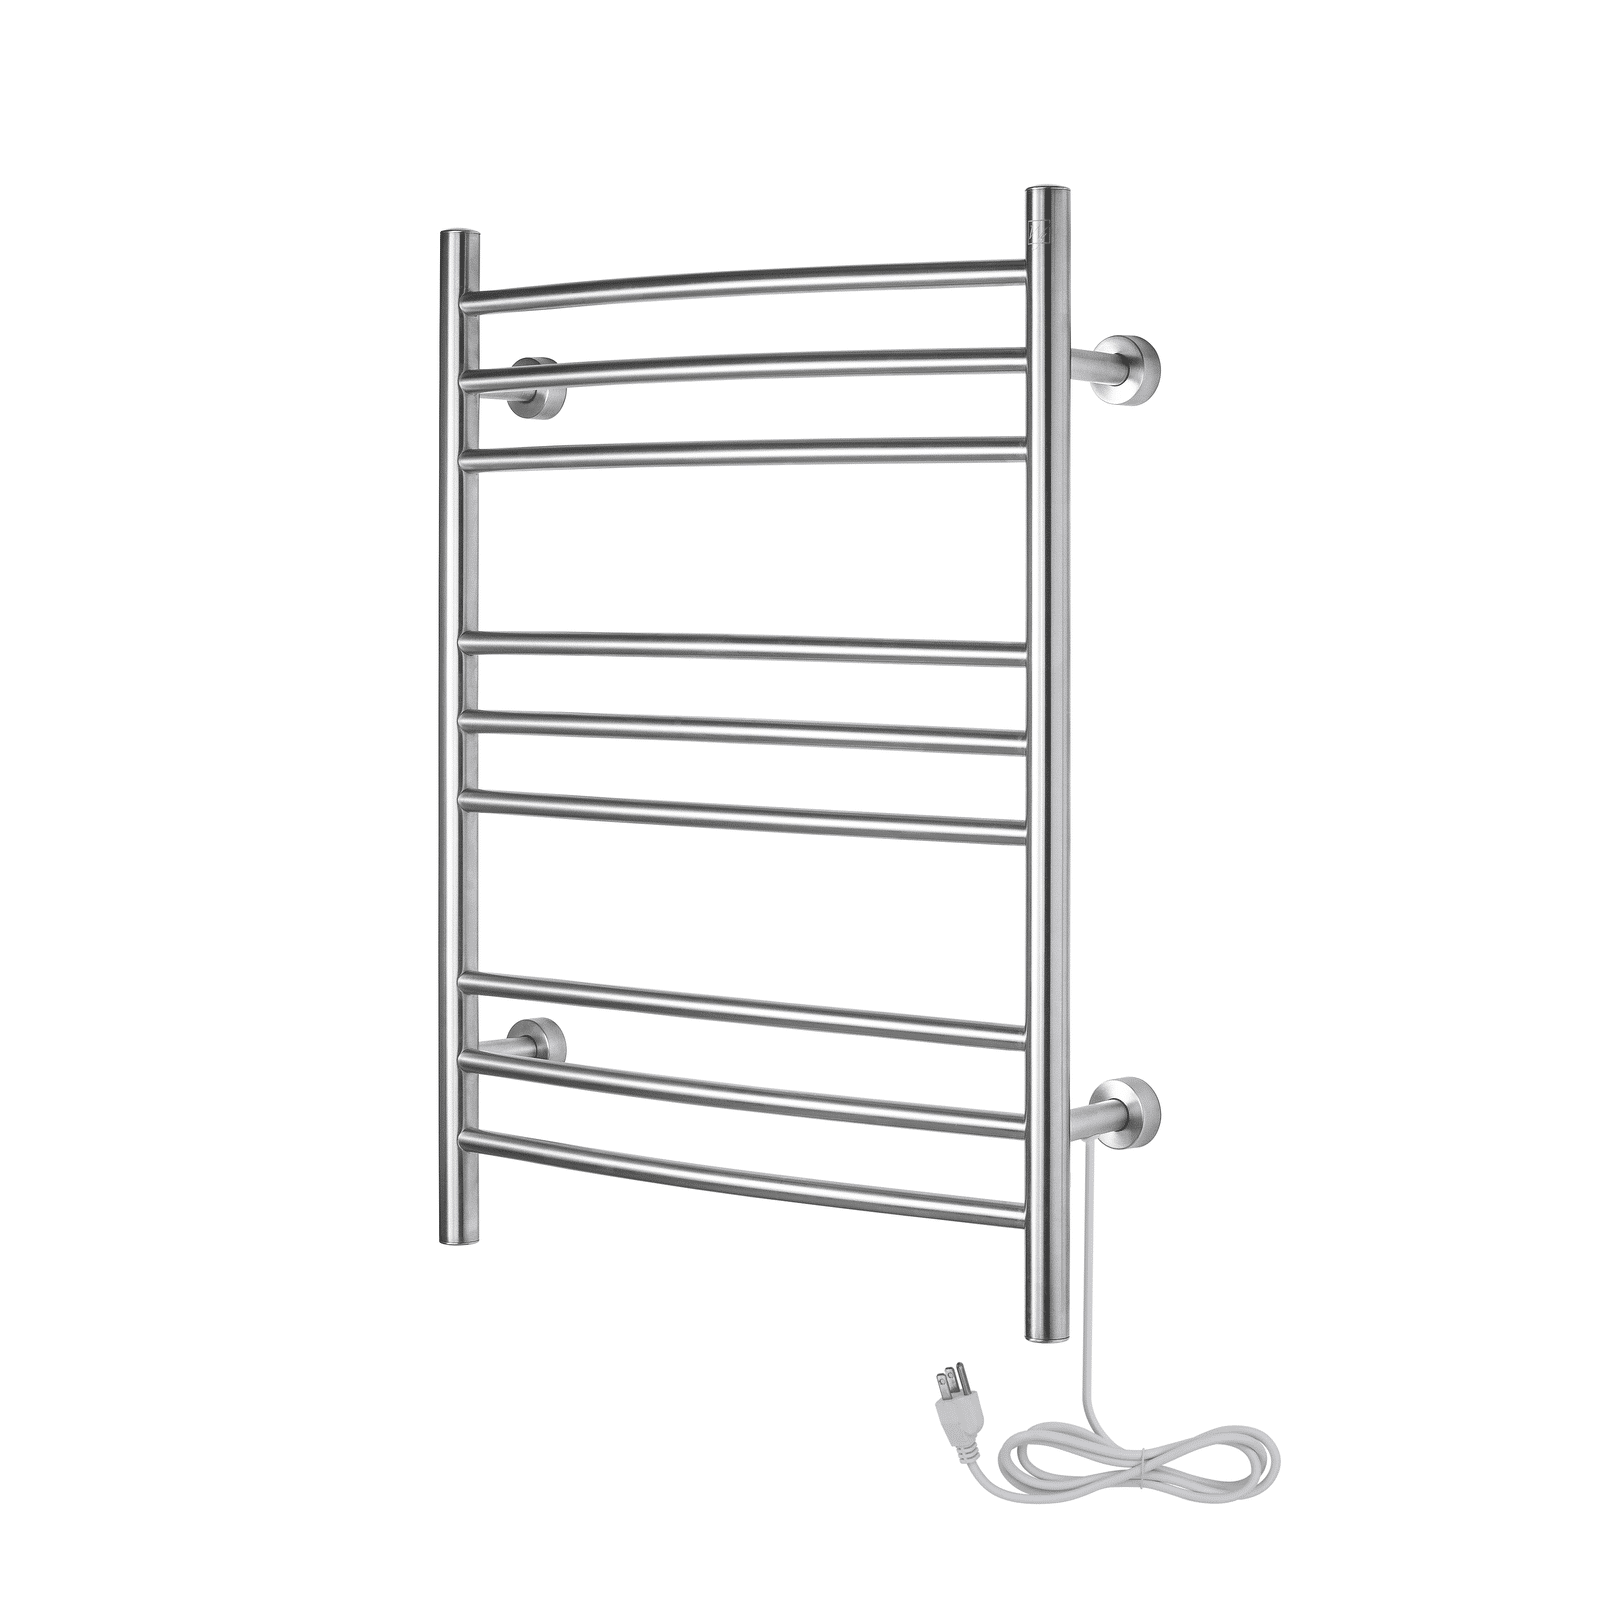 WarmlyYours Riviera Electric Towel Warmer 24"W x 32"H x 6.1"D, Brushed, Hardwired or Plug-in